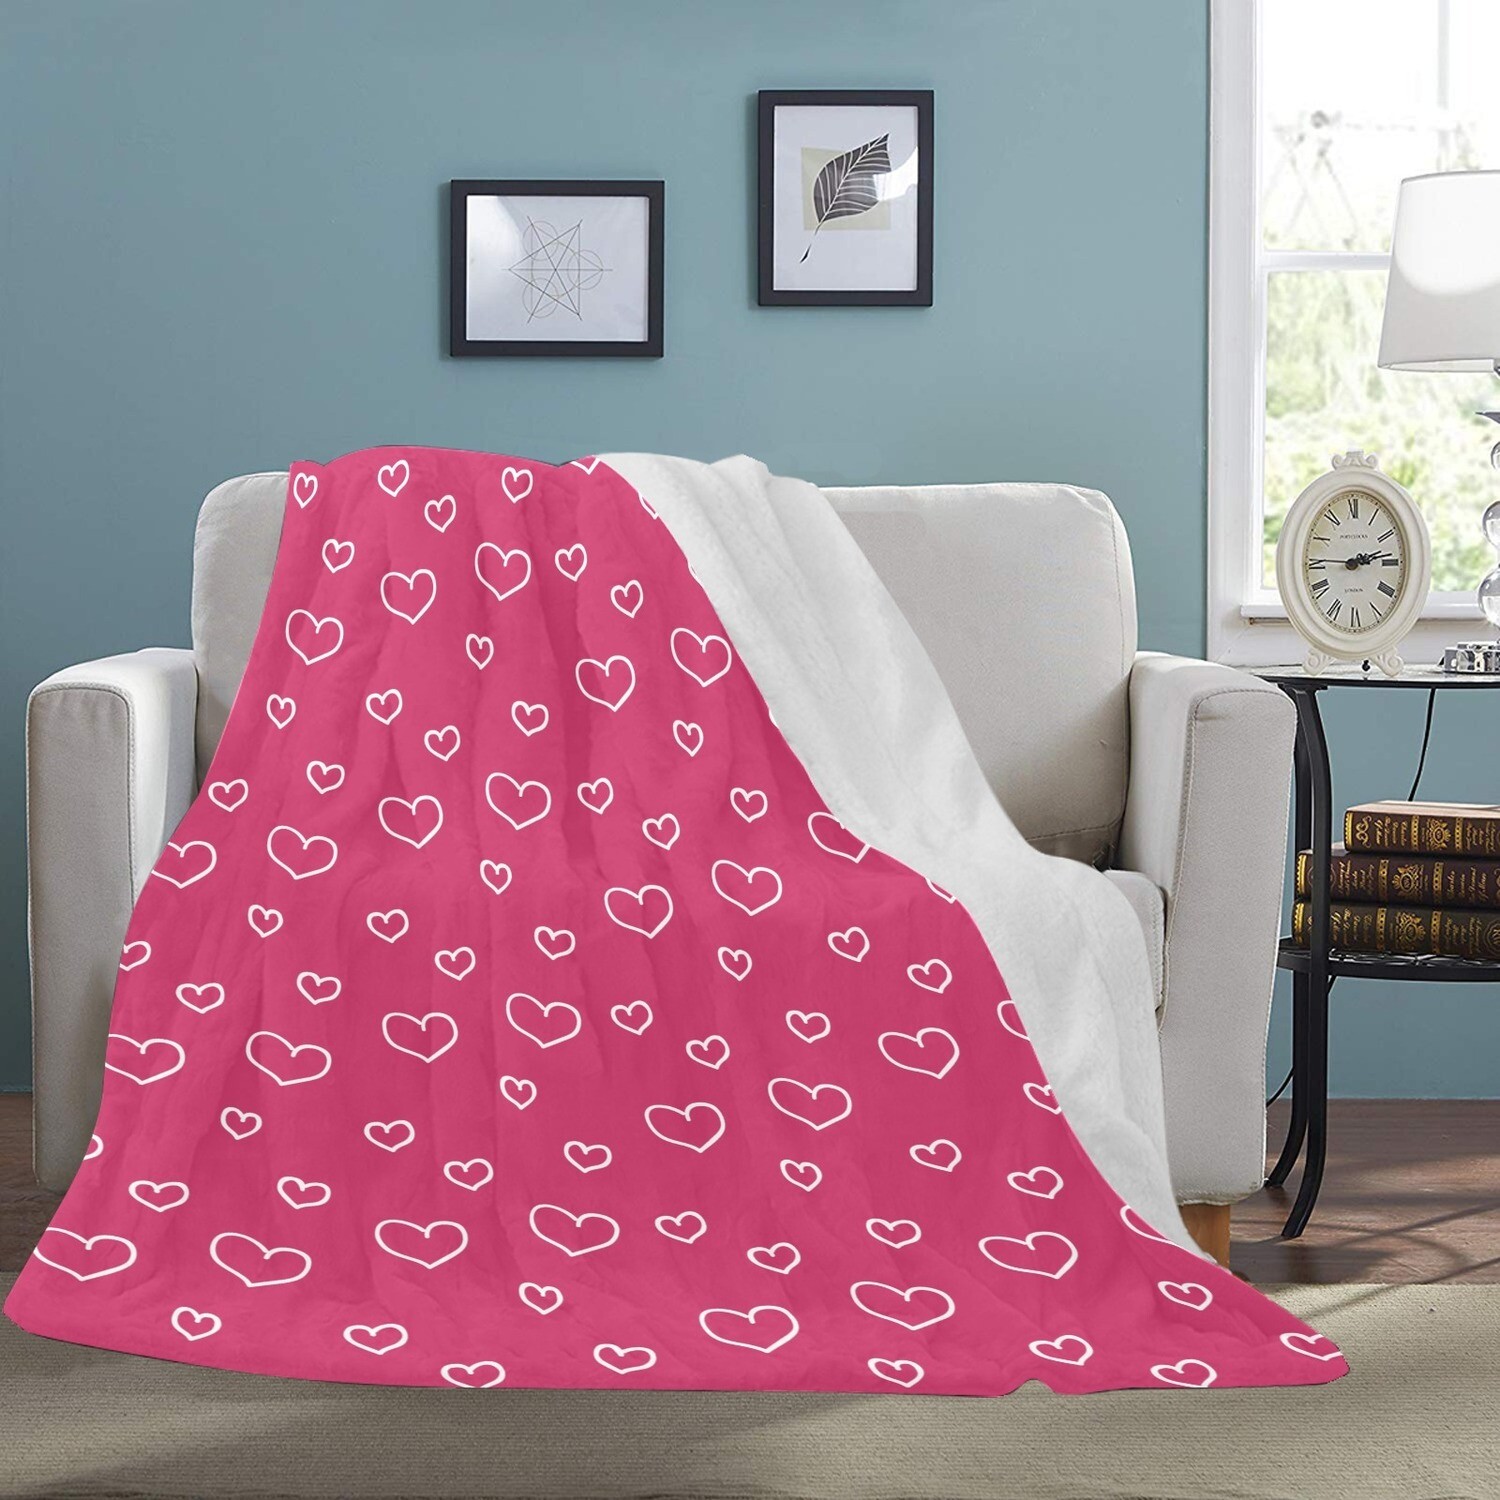 🤴🏽👸🏽💕Large Ultra-Soft Micro Fleece Blanket Valentine white outline hearts on raspberry sorbet pink, gift, gift for her, gift for him, gift for them, 70"x80"